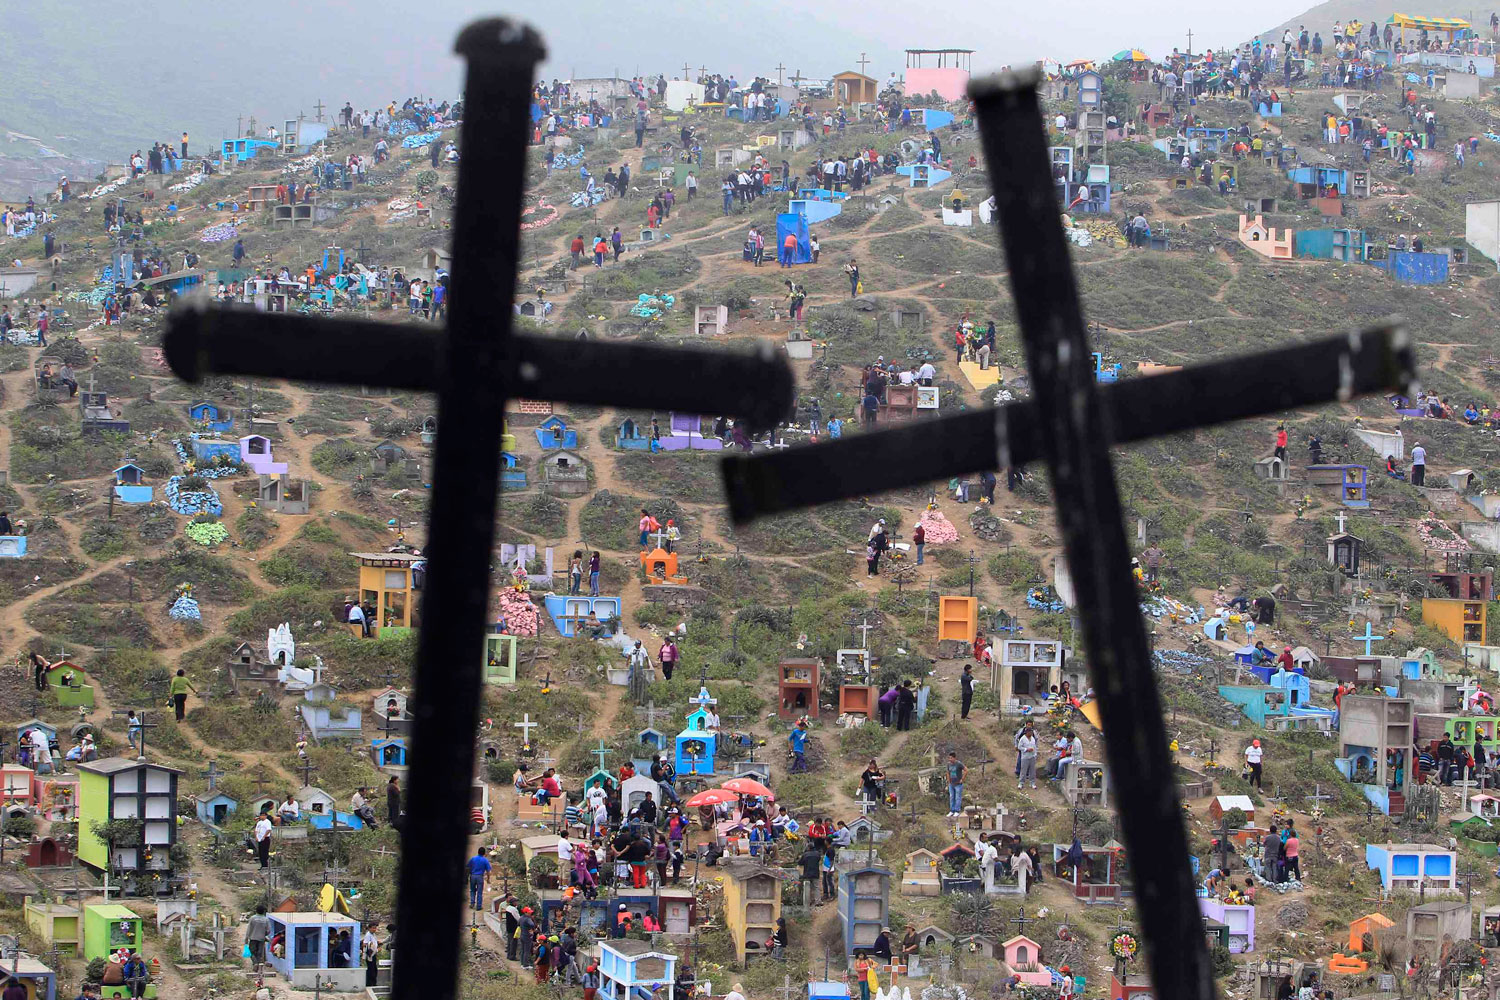 Image: Nov. 1, 2012. A view of Nueva Esperanza cemetery during the Day of the Dead celebrations in Villa Maria, Peru. Each year people visit the cemetery, one of Latin America's largest, to honor the dead.